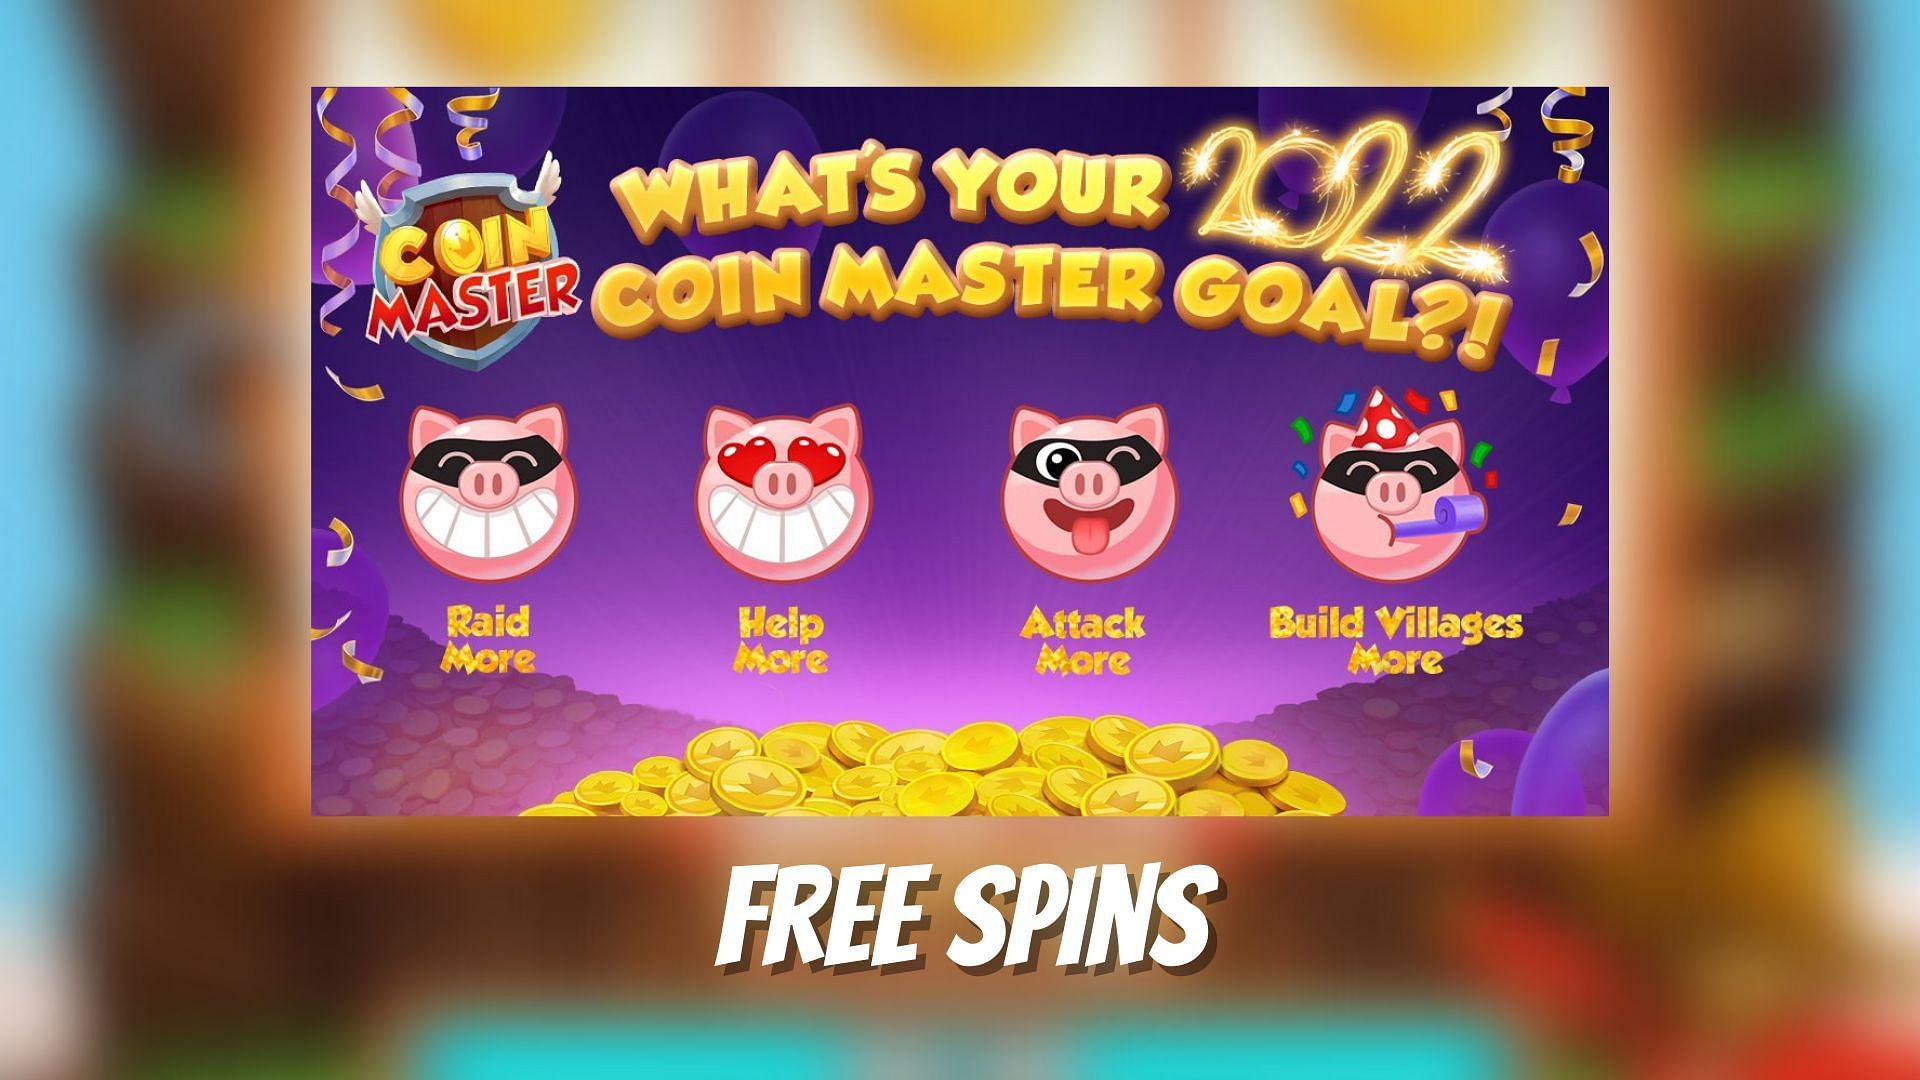 Coin Master developers frequently release reward links that grant free spins (Image via Sportskeeda)